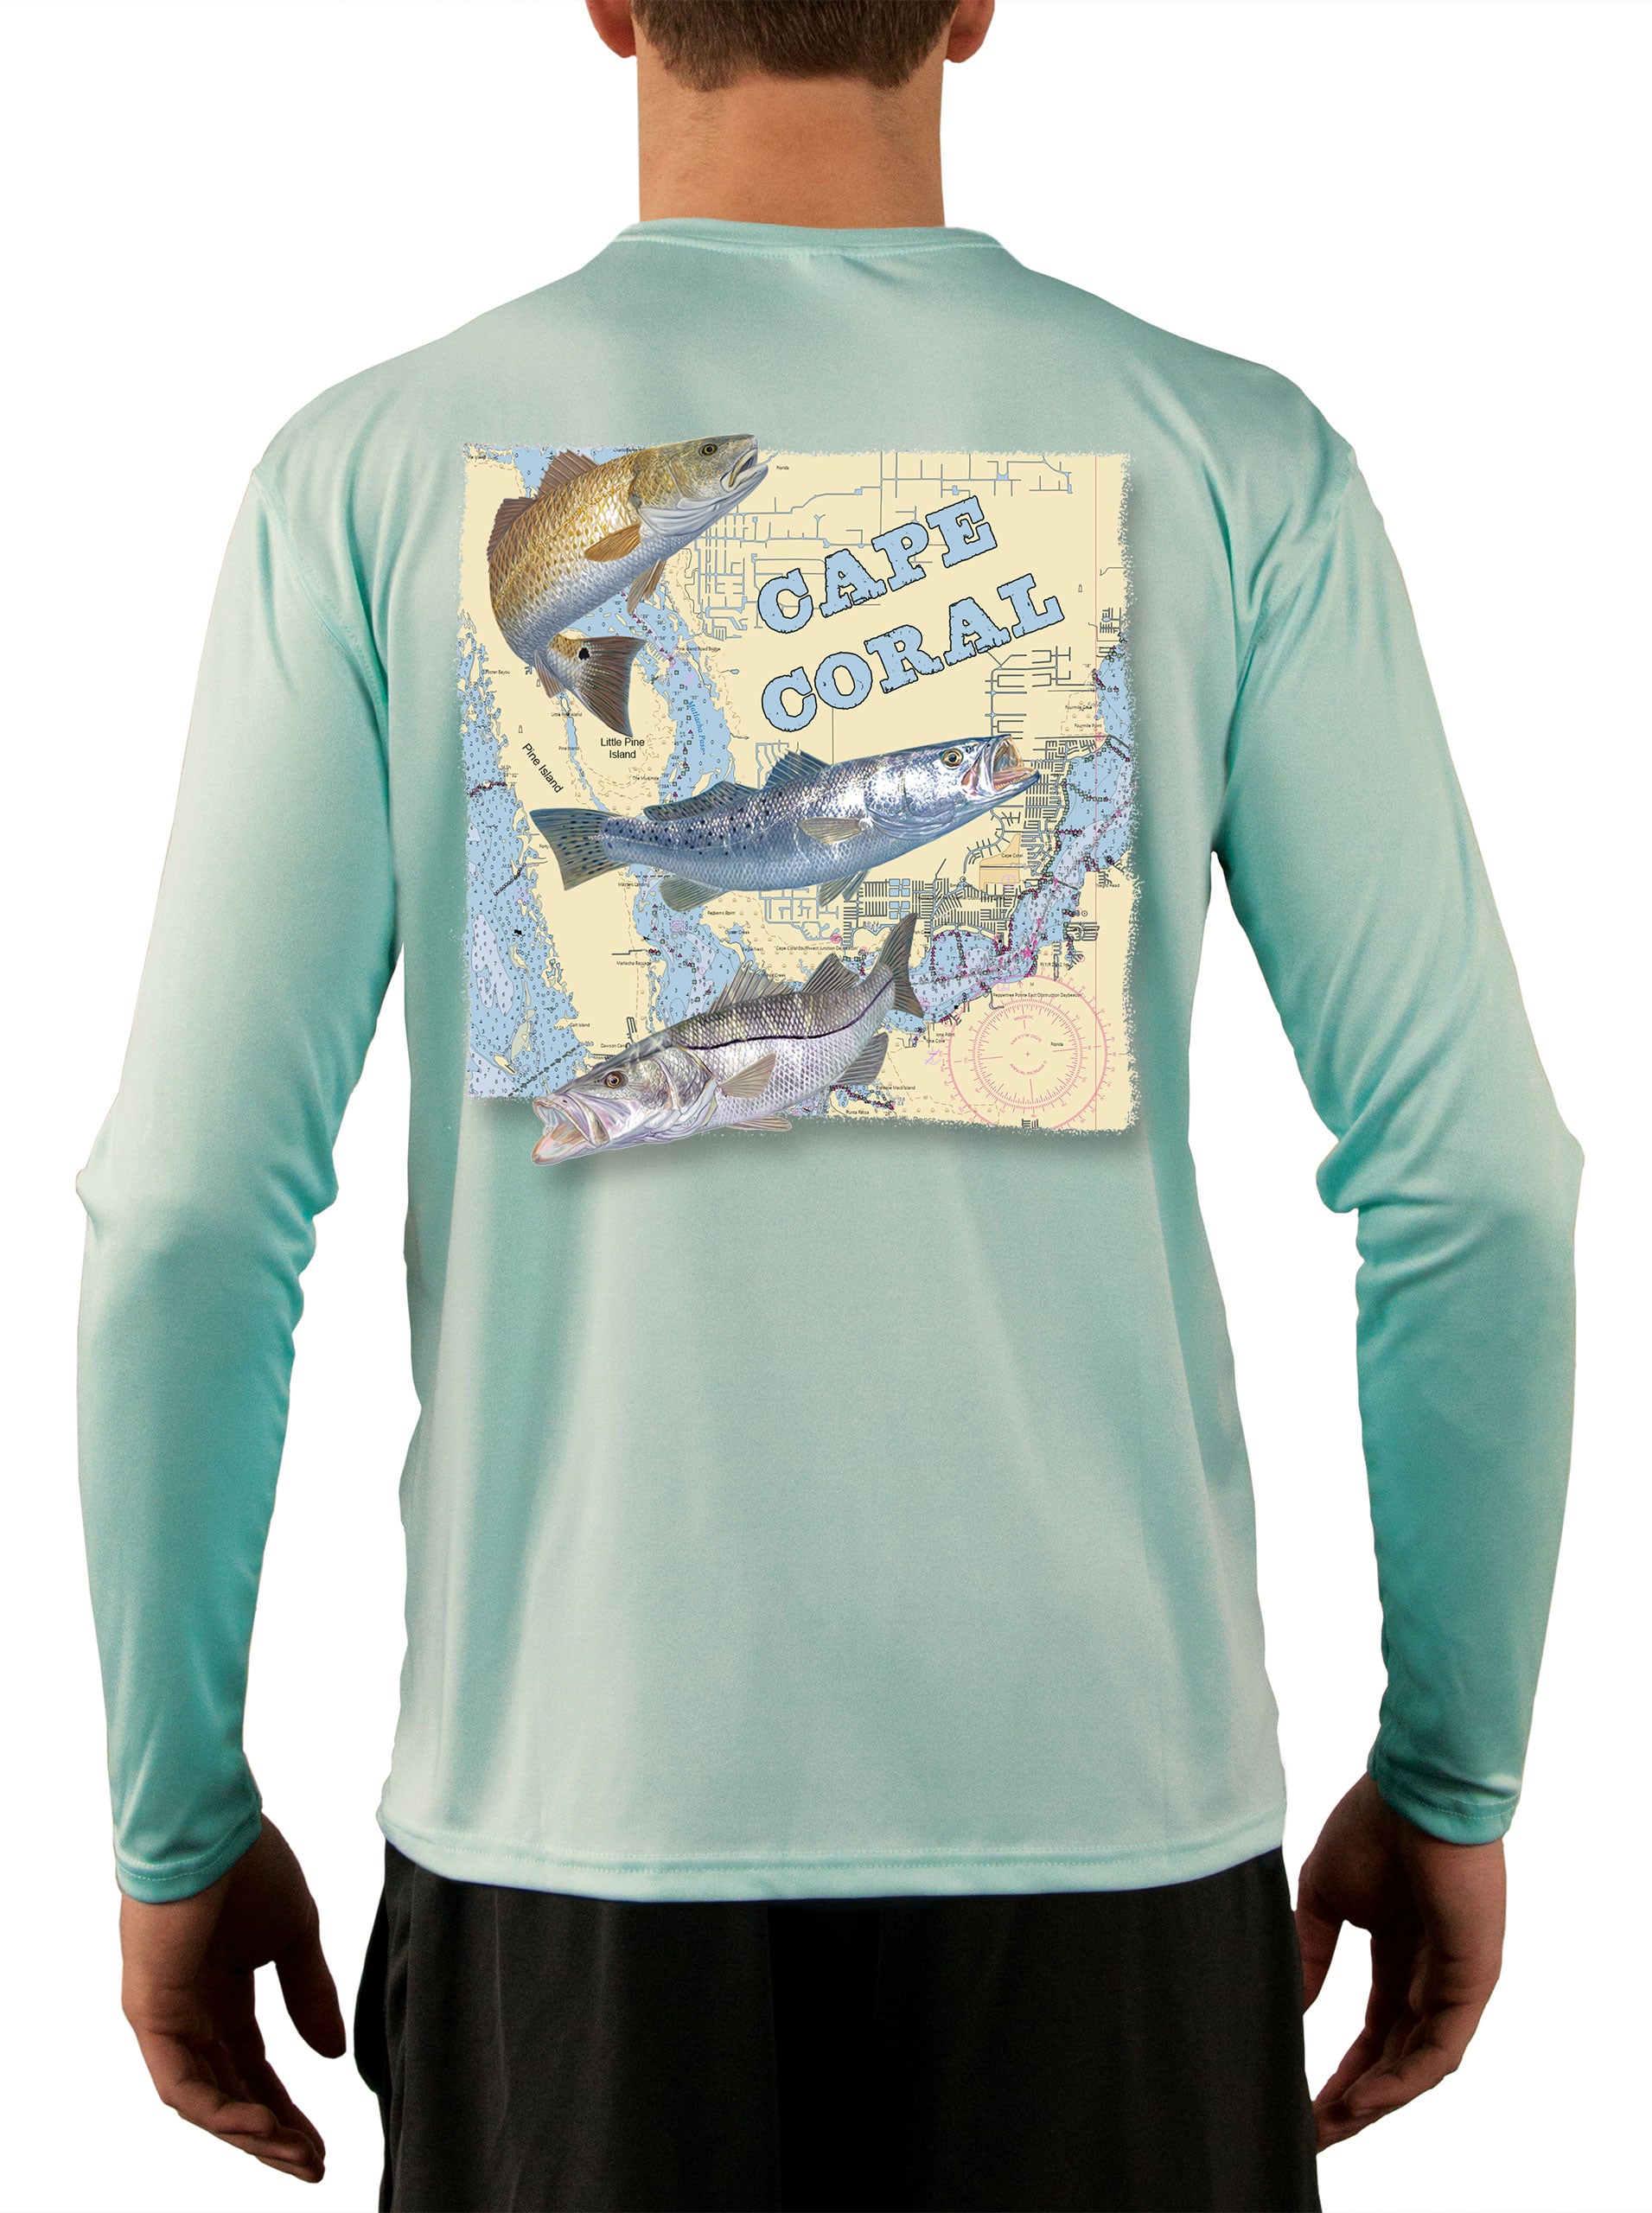 Cape Coral Florida Fishing Shirts For Men Redfish Speckled Sea Trout Snook Red Drum Seatrout - Skiff Life